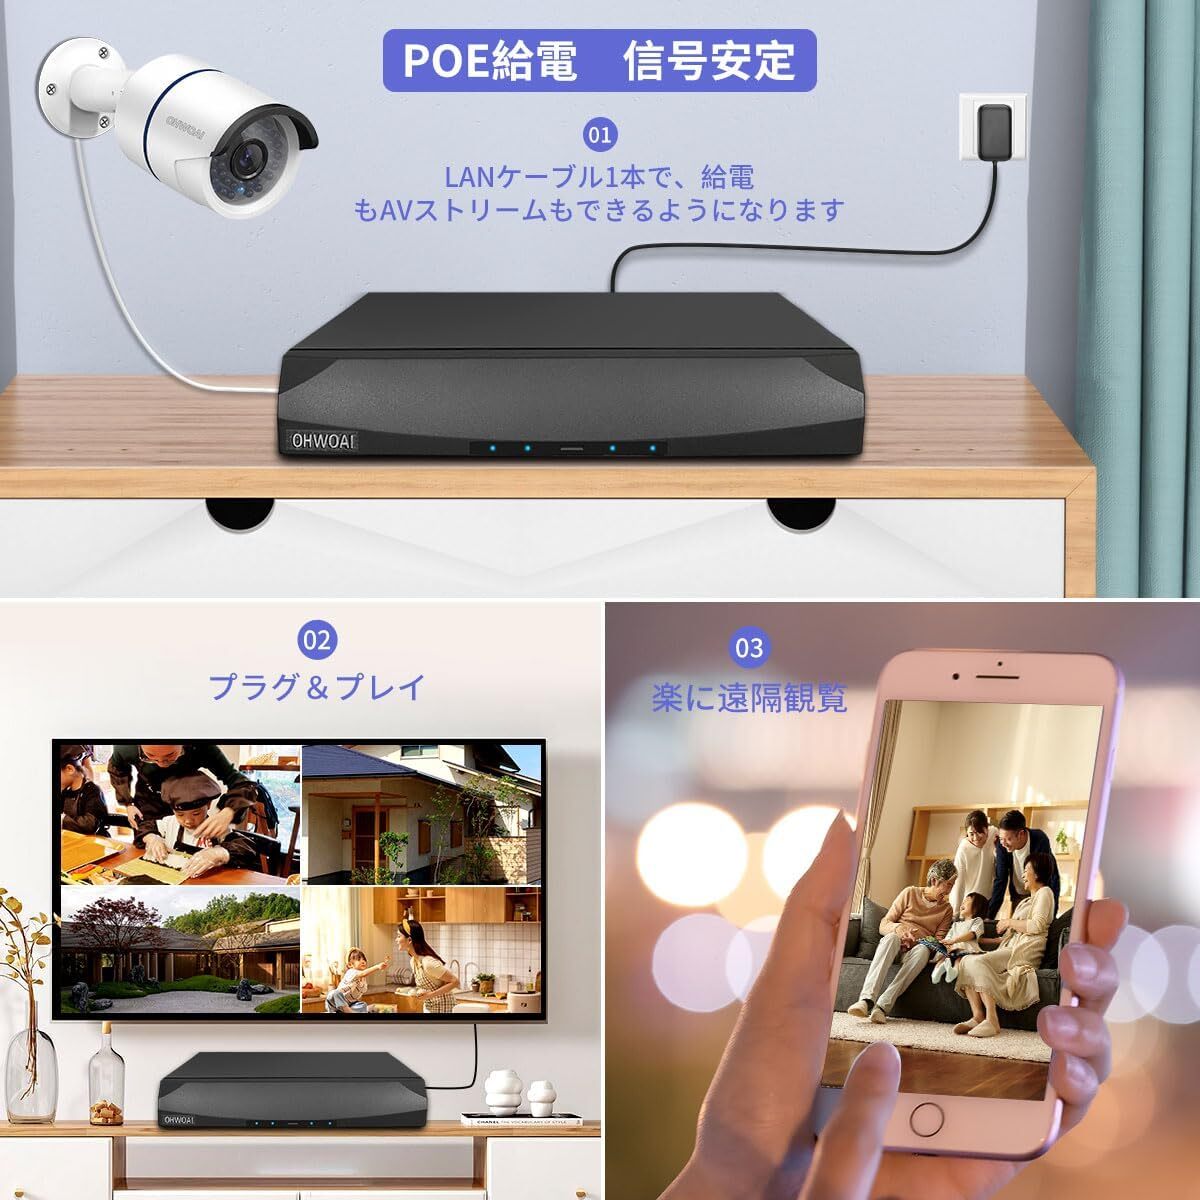 [ new goods ]30 meter super a little over night vision POE security camera set monitoring camera 8 pcs HDD4TB built-in NVR high resolution usually video recording AI human body detection interactive telephone call outdoors indoor POE supply of electricity 